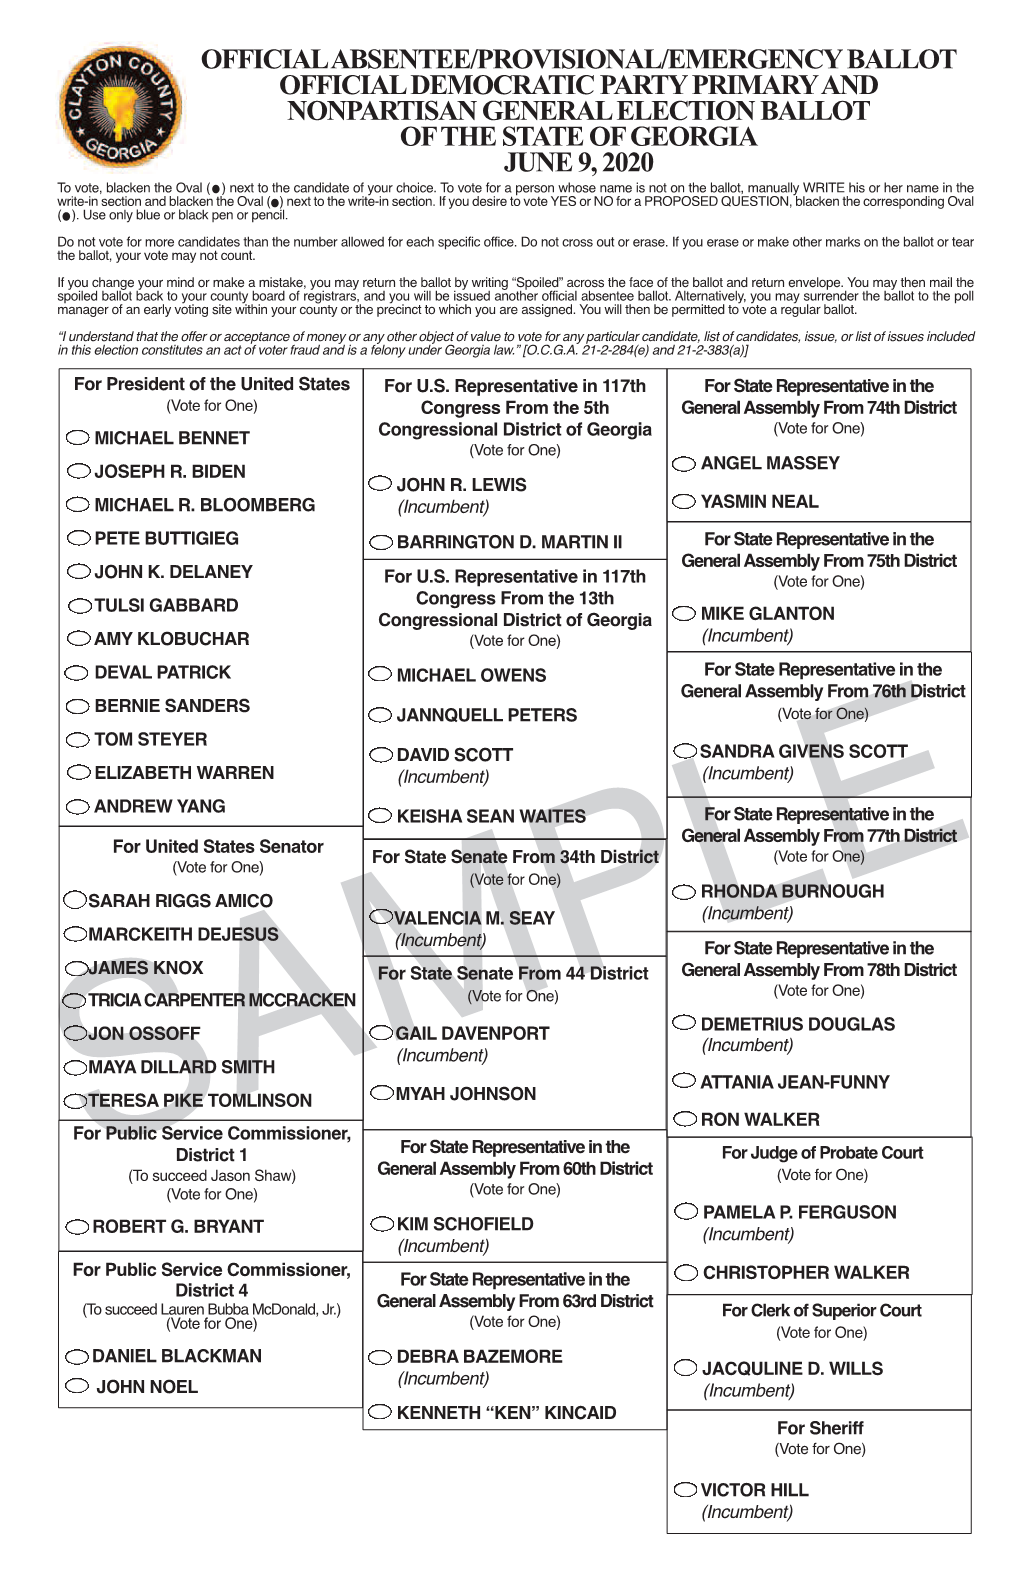 Official Absentee/Provisional/Emergency Ballot Official Democratic Party Primary and Nonpartisan General Election Ballot Of